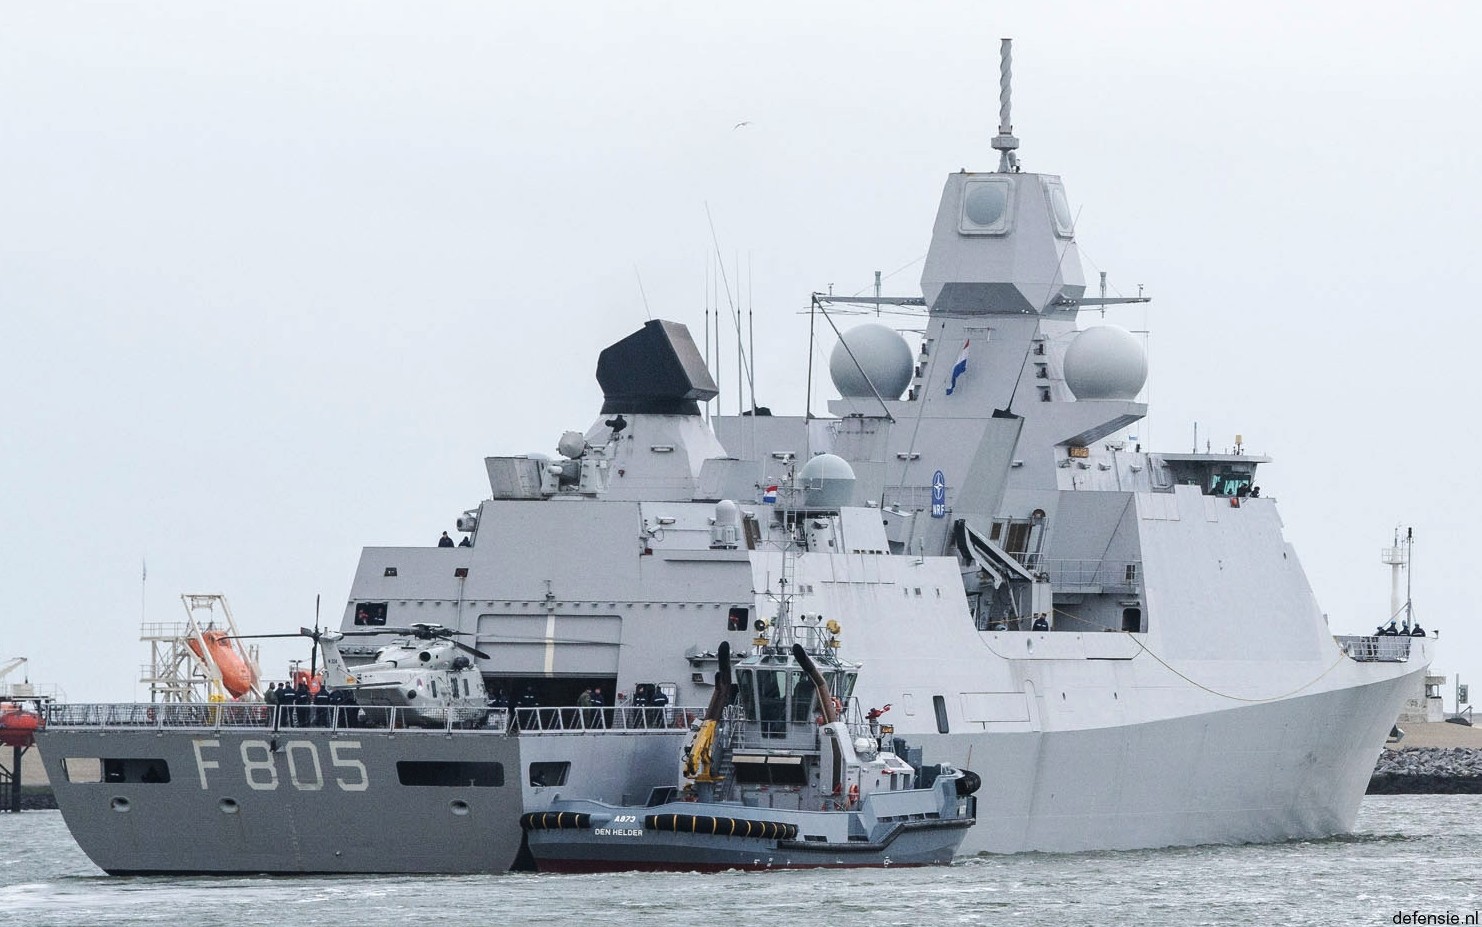 f-805 hnlms evertsen guided missile frigate ffg lcf royal netherlands navy 25 nh90 helicopter